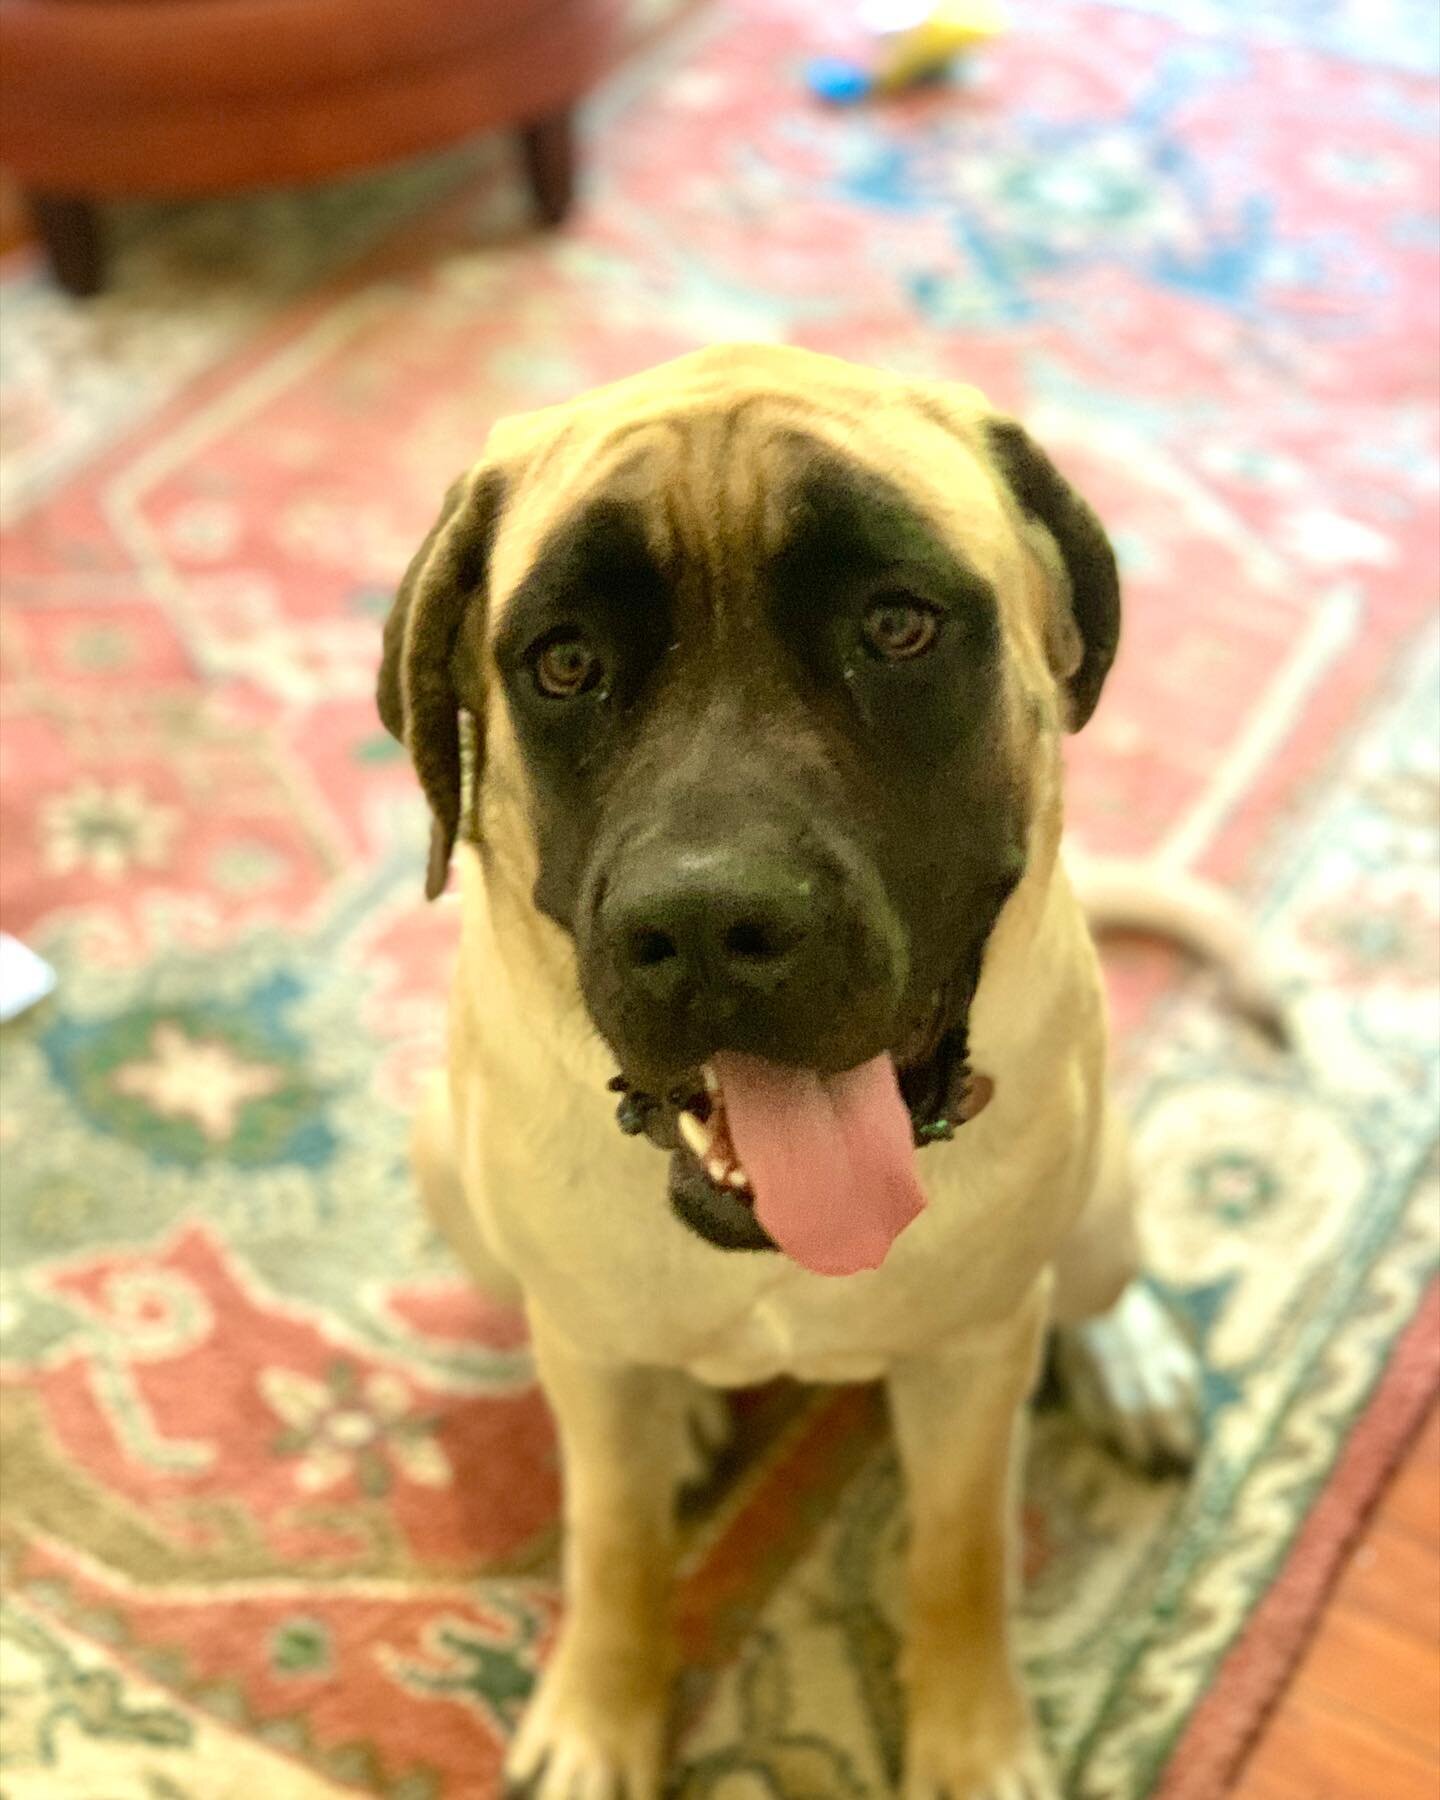 Sausage Squad! For a little #FeelGoodFriday we wanted to introduce you to Elsie aka &ldquo;Big Els&rdquo; aka the official Registers #SausageDog 🐶
.
She&rsquo;s a 10 month old English Mastiff (same as &ldquo;The Beast&rdquo; from Sandlot) and sweet 